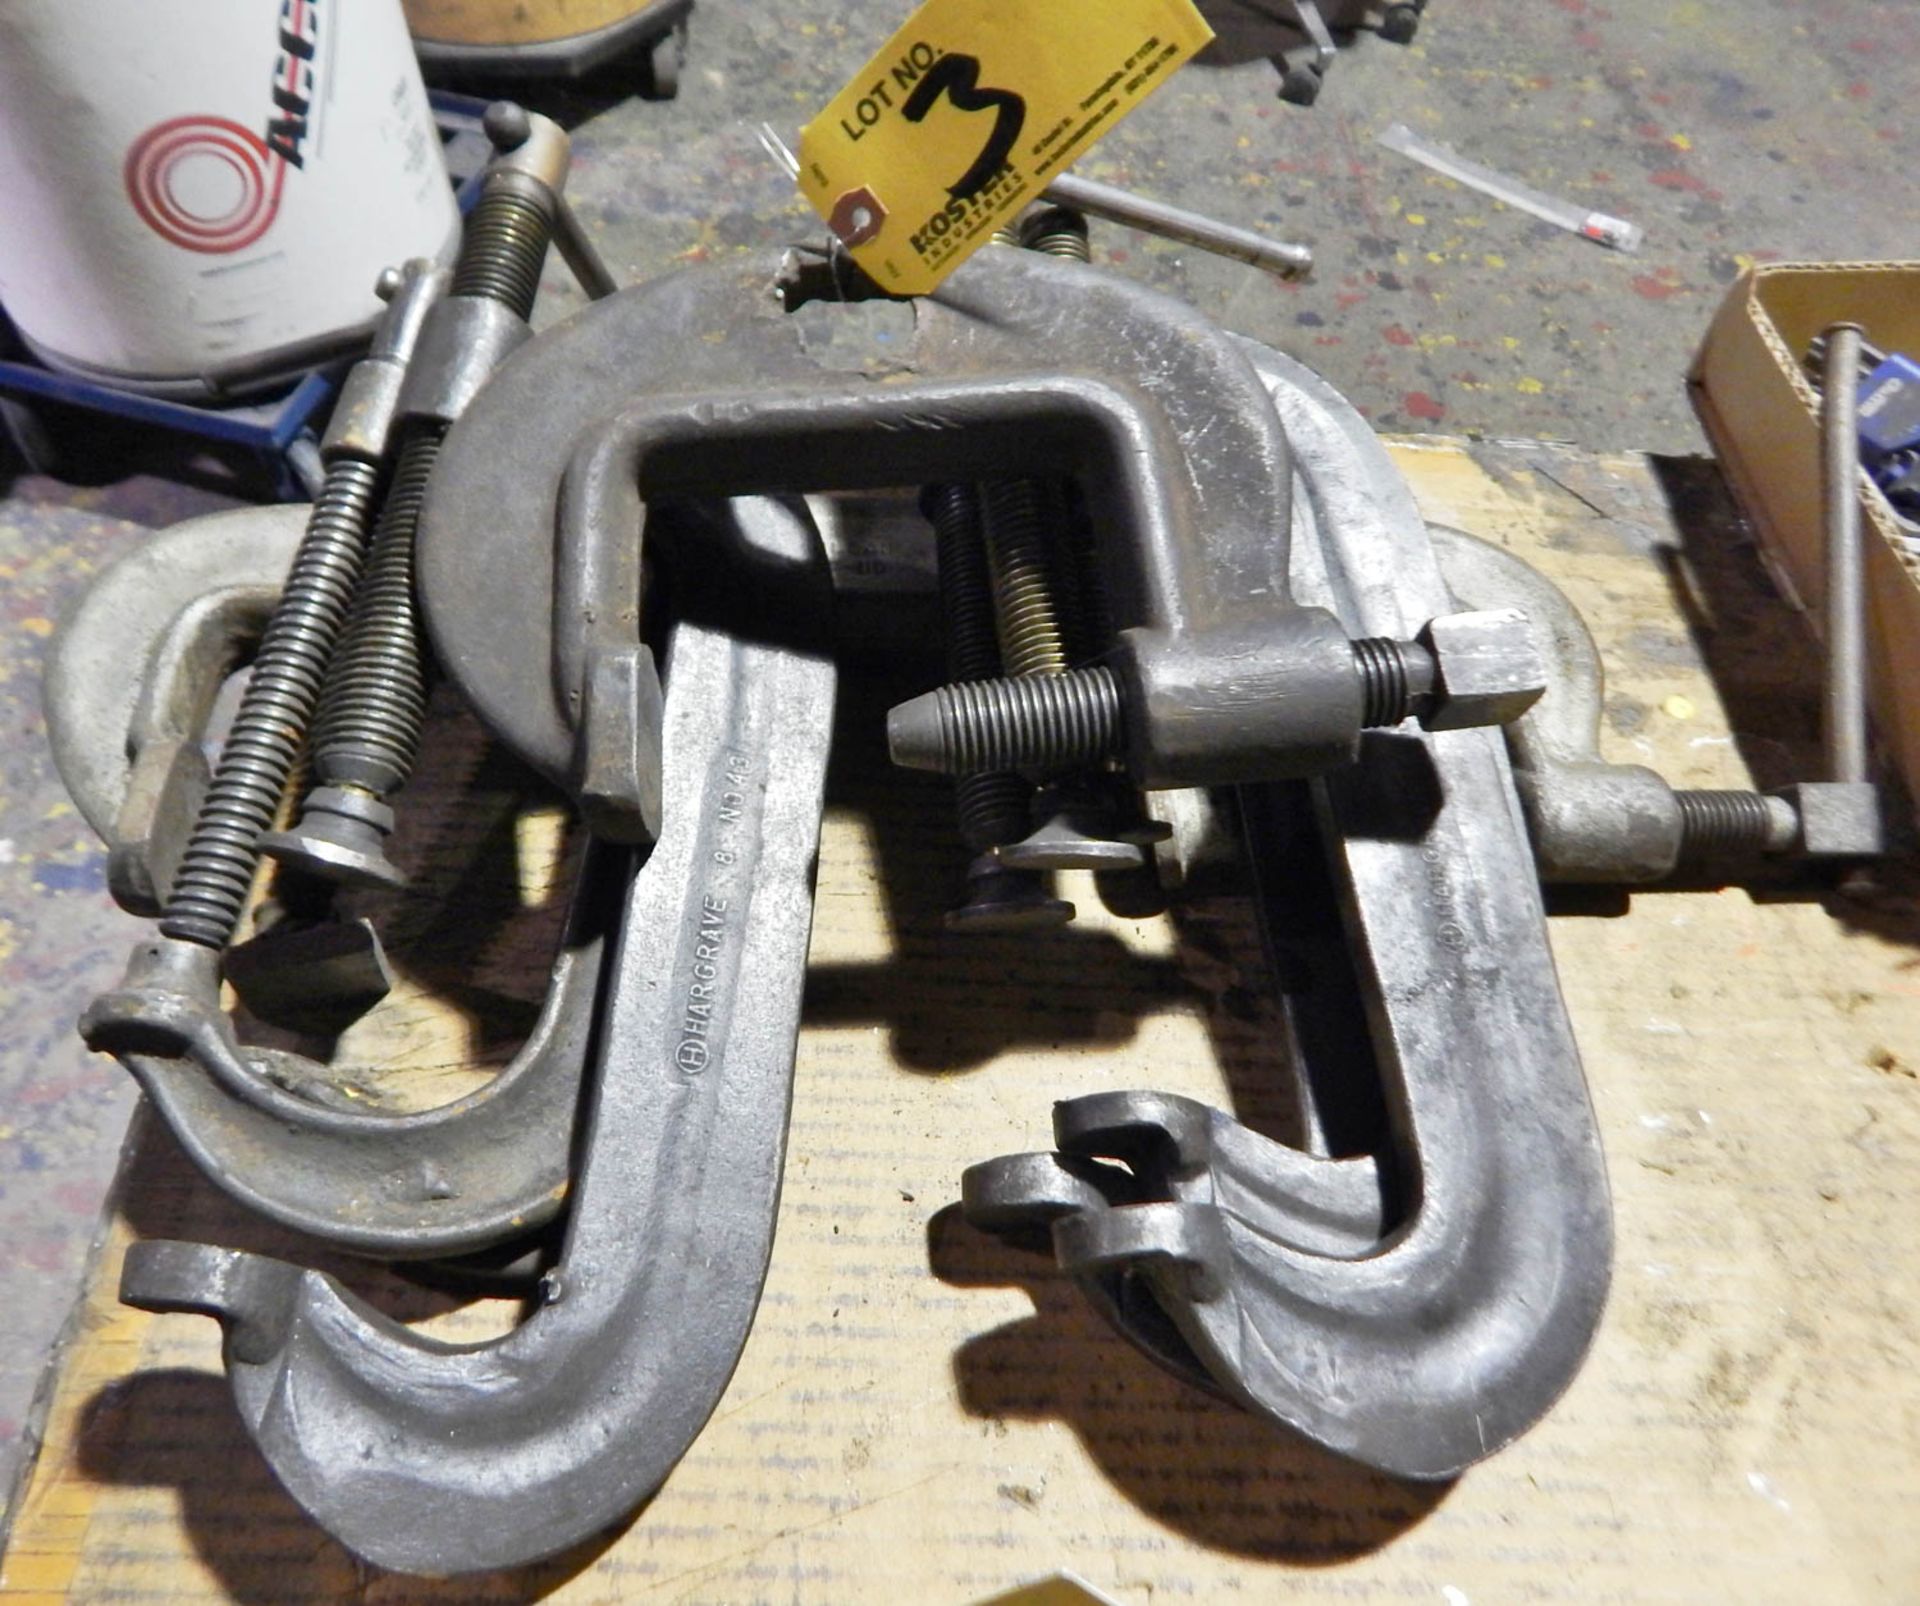 C CLAMPS